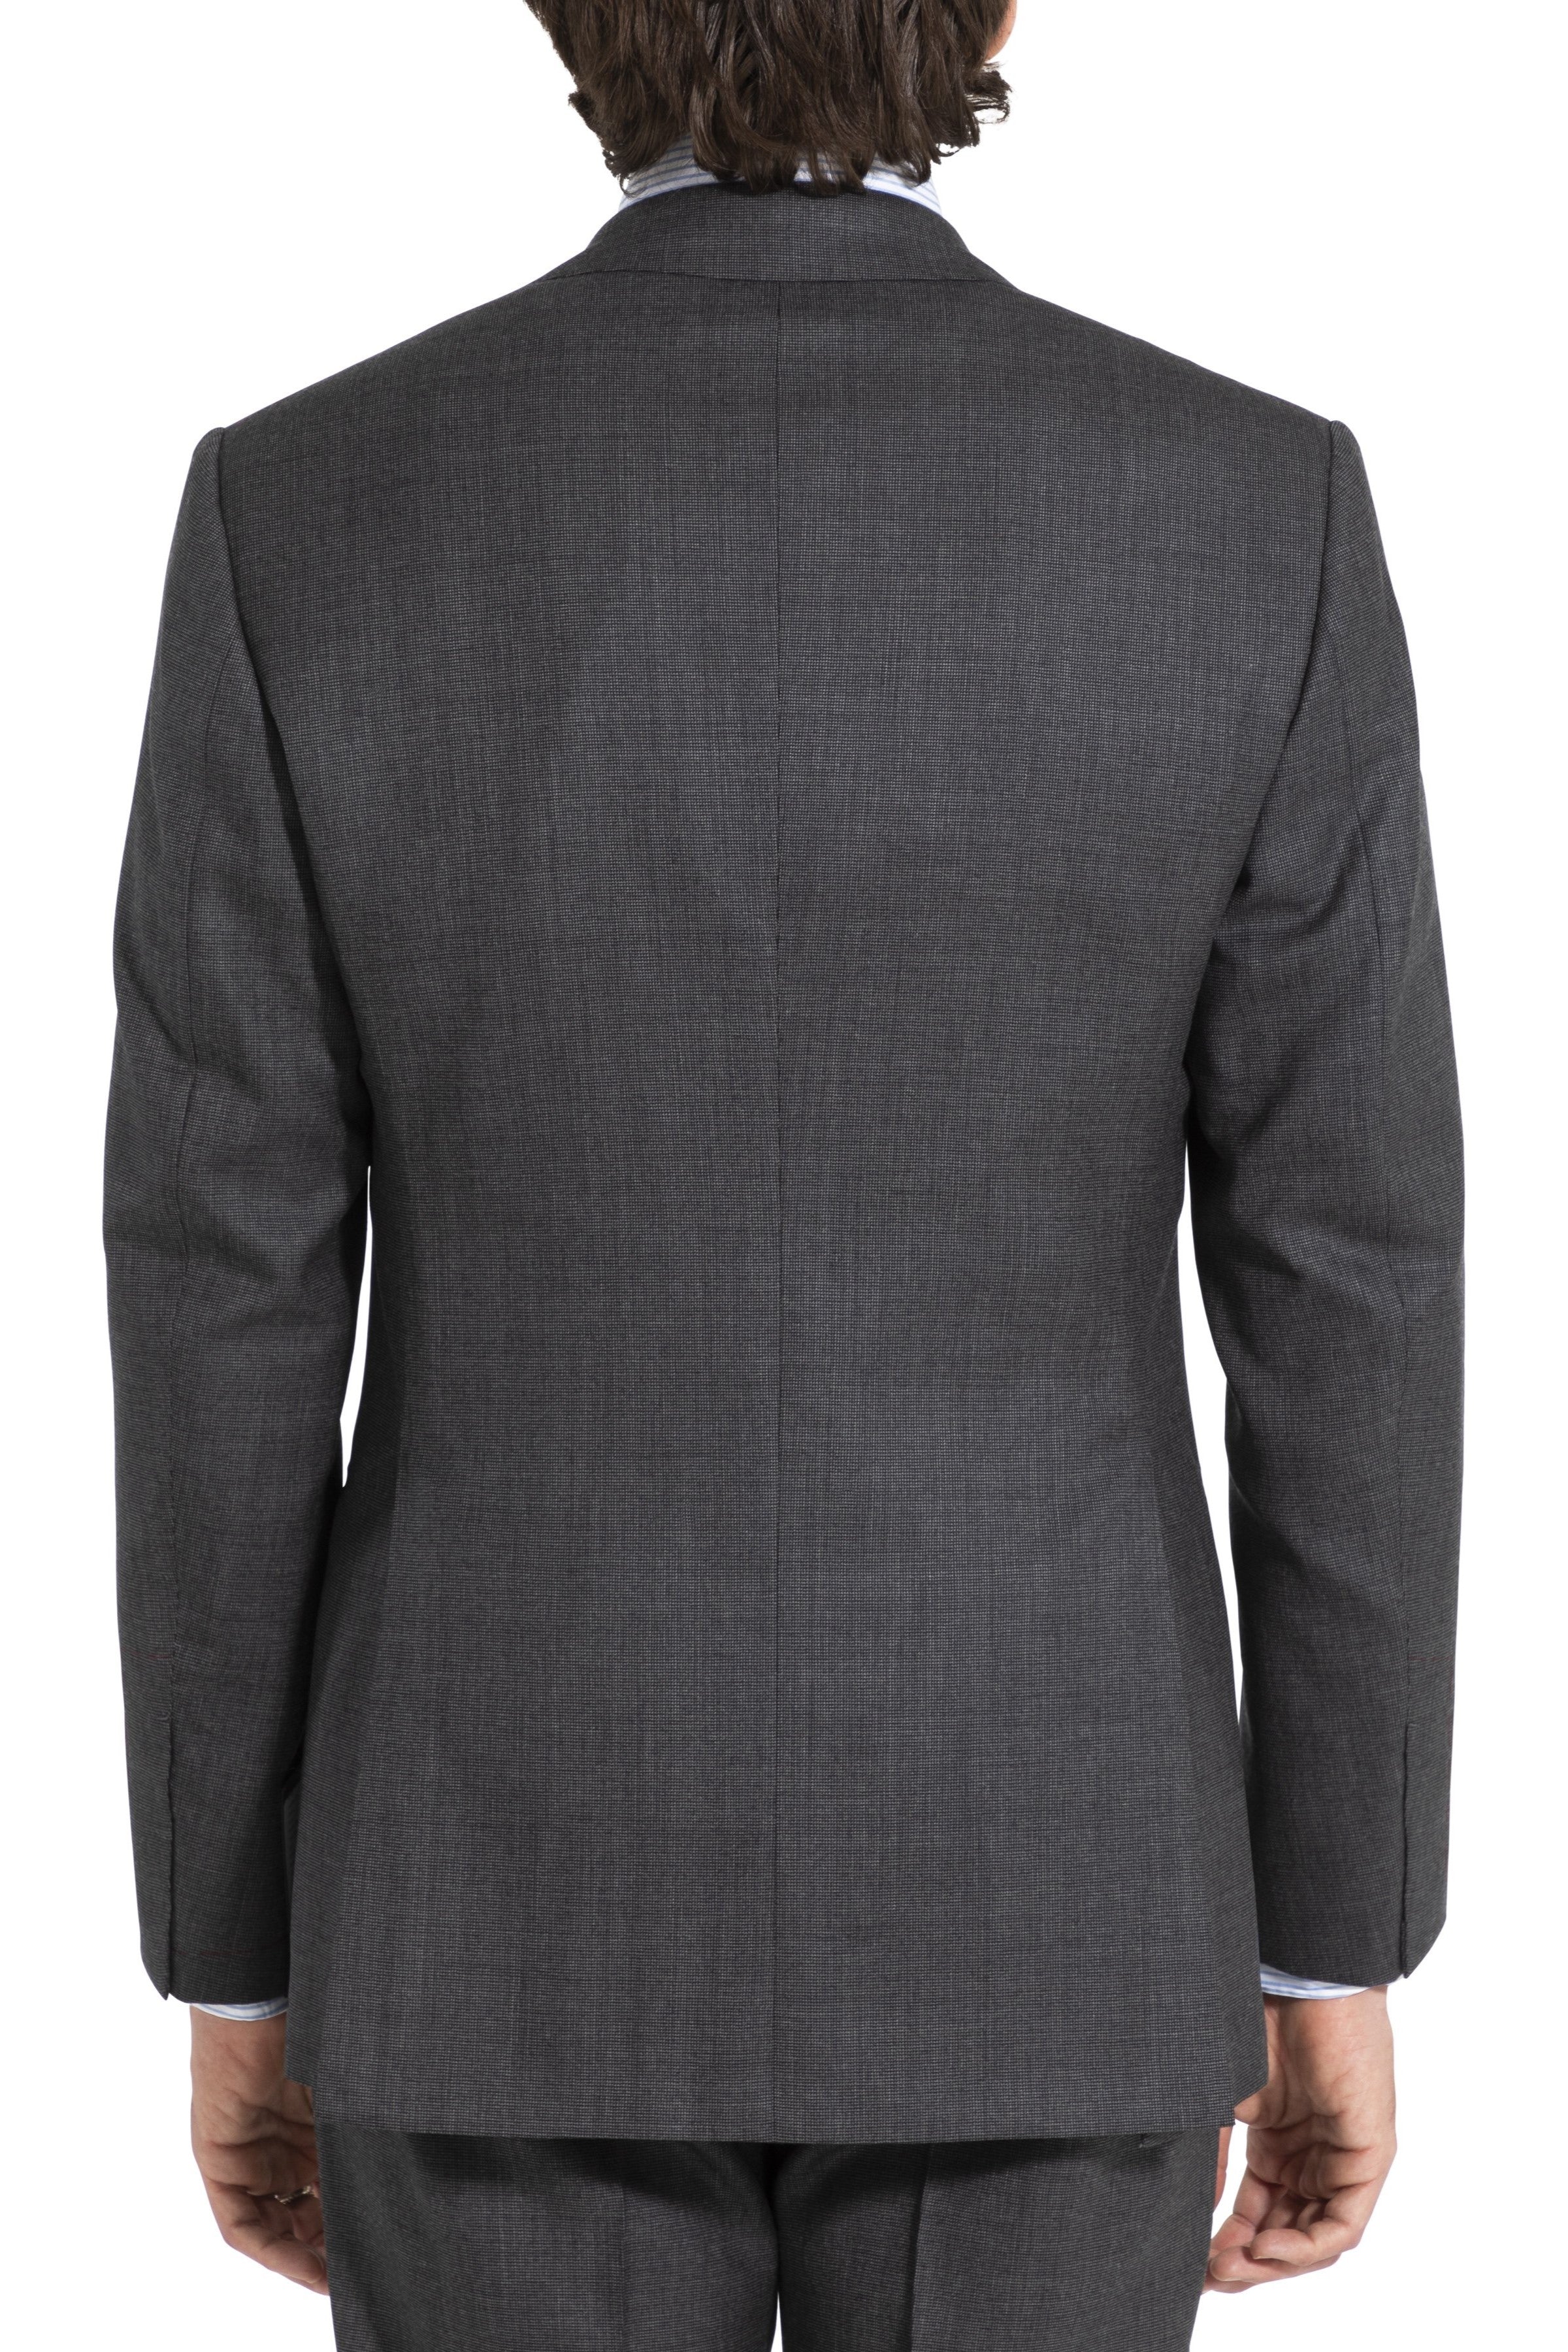 The Armoury Model 101 Grey Wool Tic Weave Suit